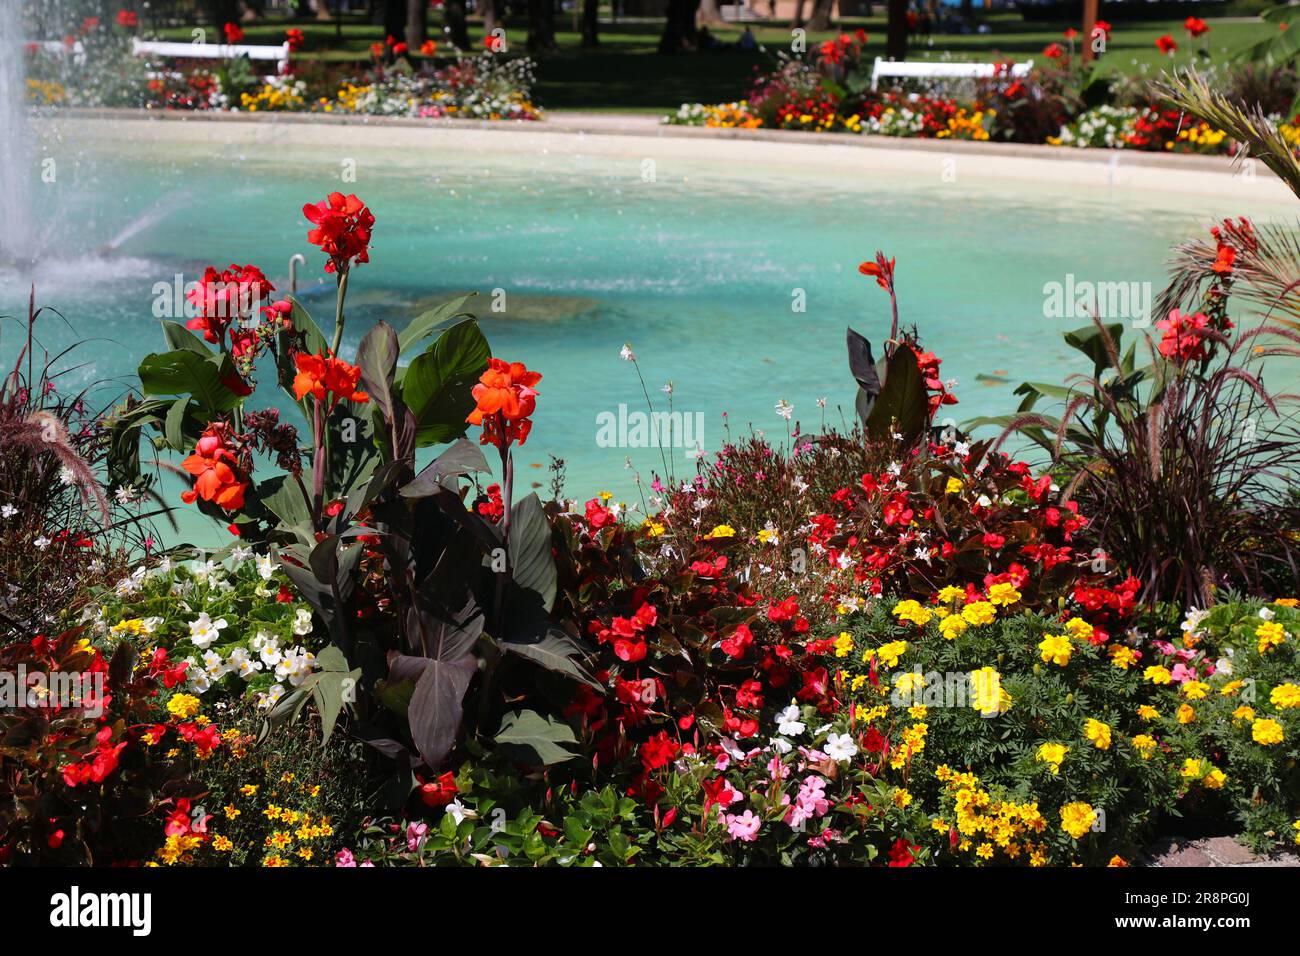 City flowerbed in Spittal and der Drau in Austria. Mixed species flower patch with marigold, begonia and canna lily. Stock Photo